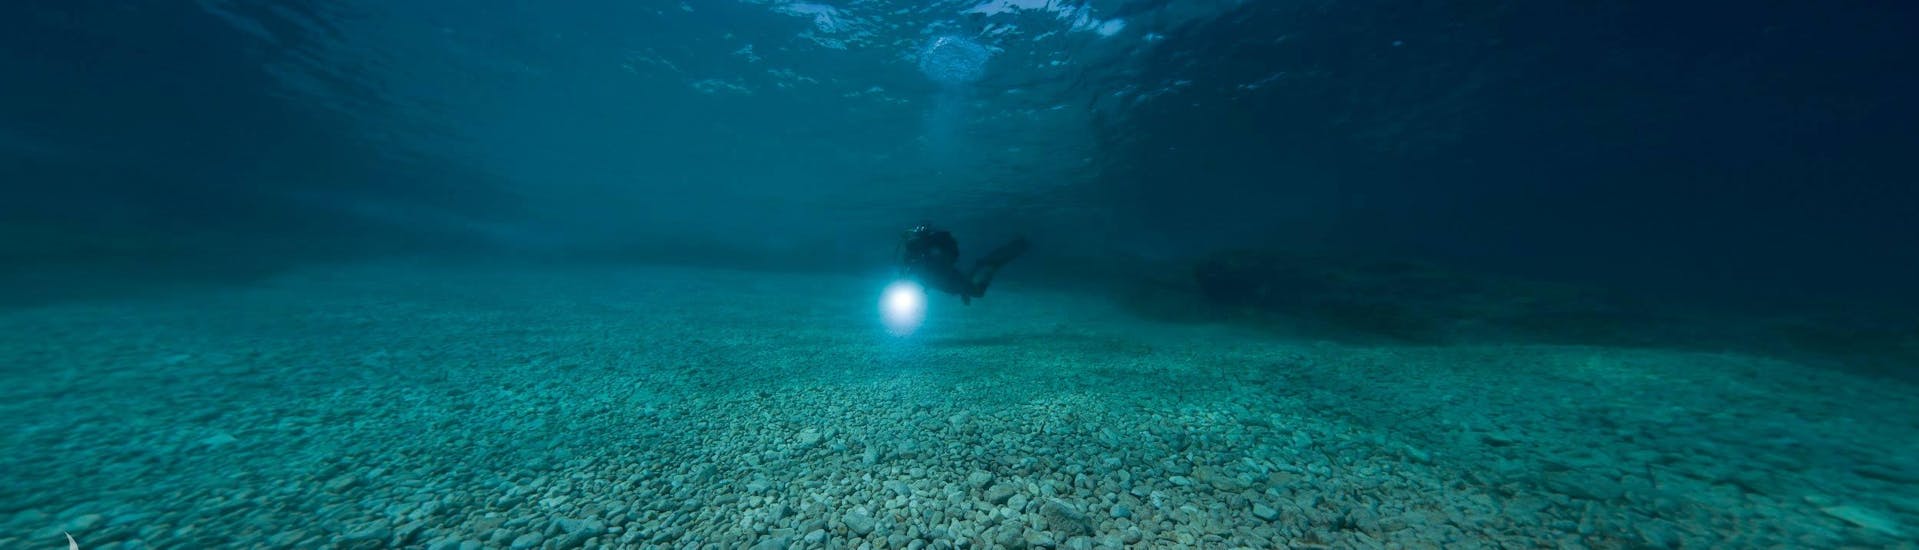 A diver from the diving school Sub Sea Son in the crystal clear sea of Mali Lošinnj, Croatia.